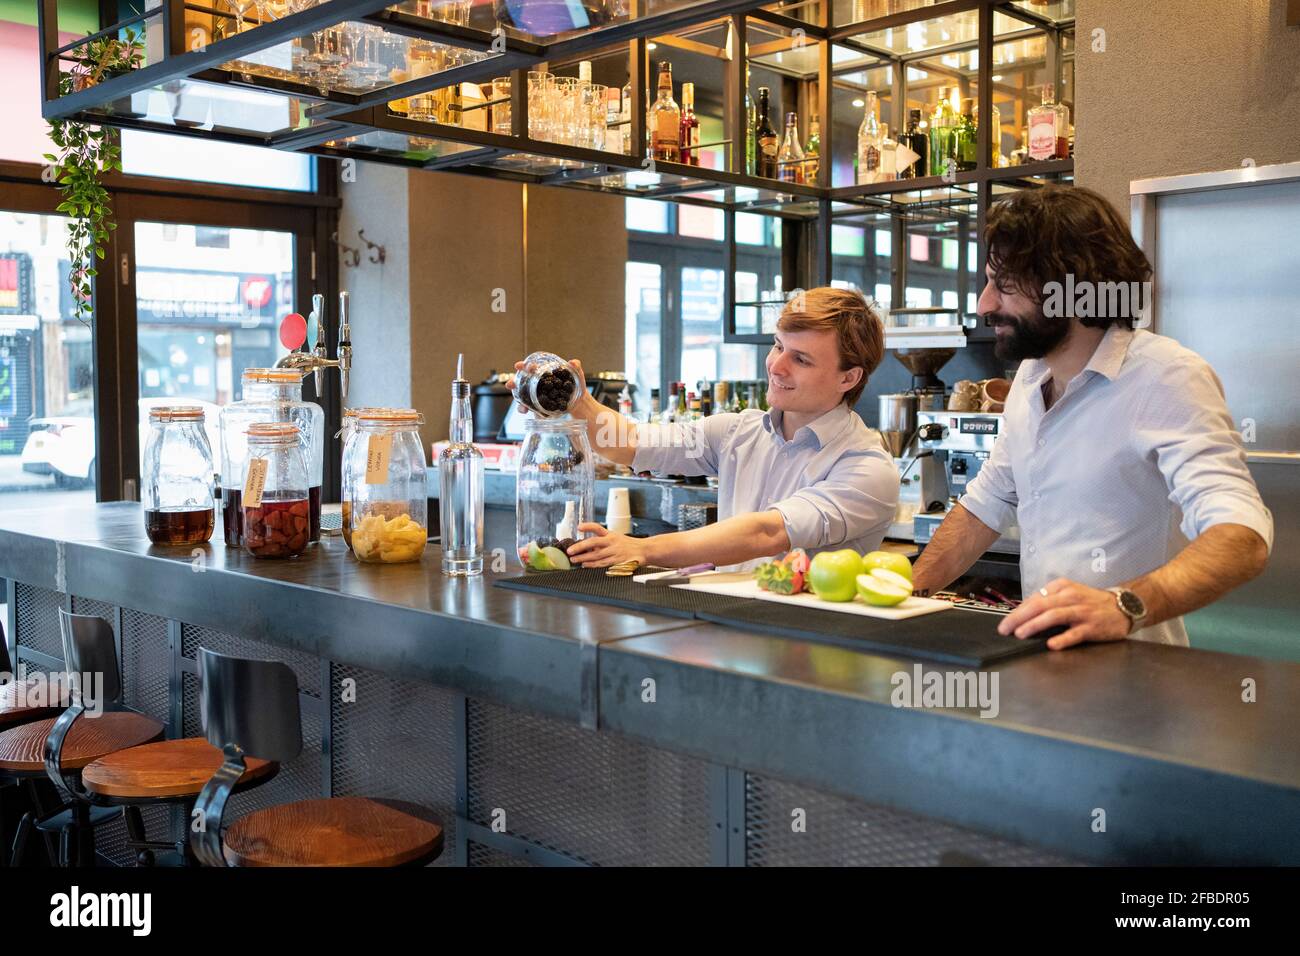 Male trainee putting blackberries in glass jar by bartender at bar counter Stock Photo